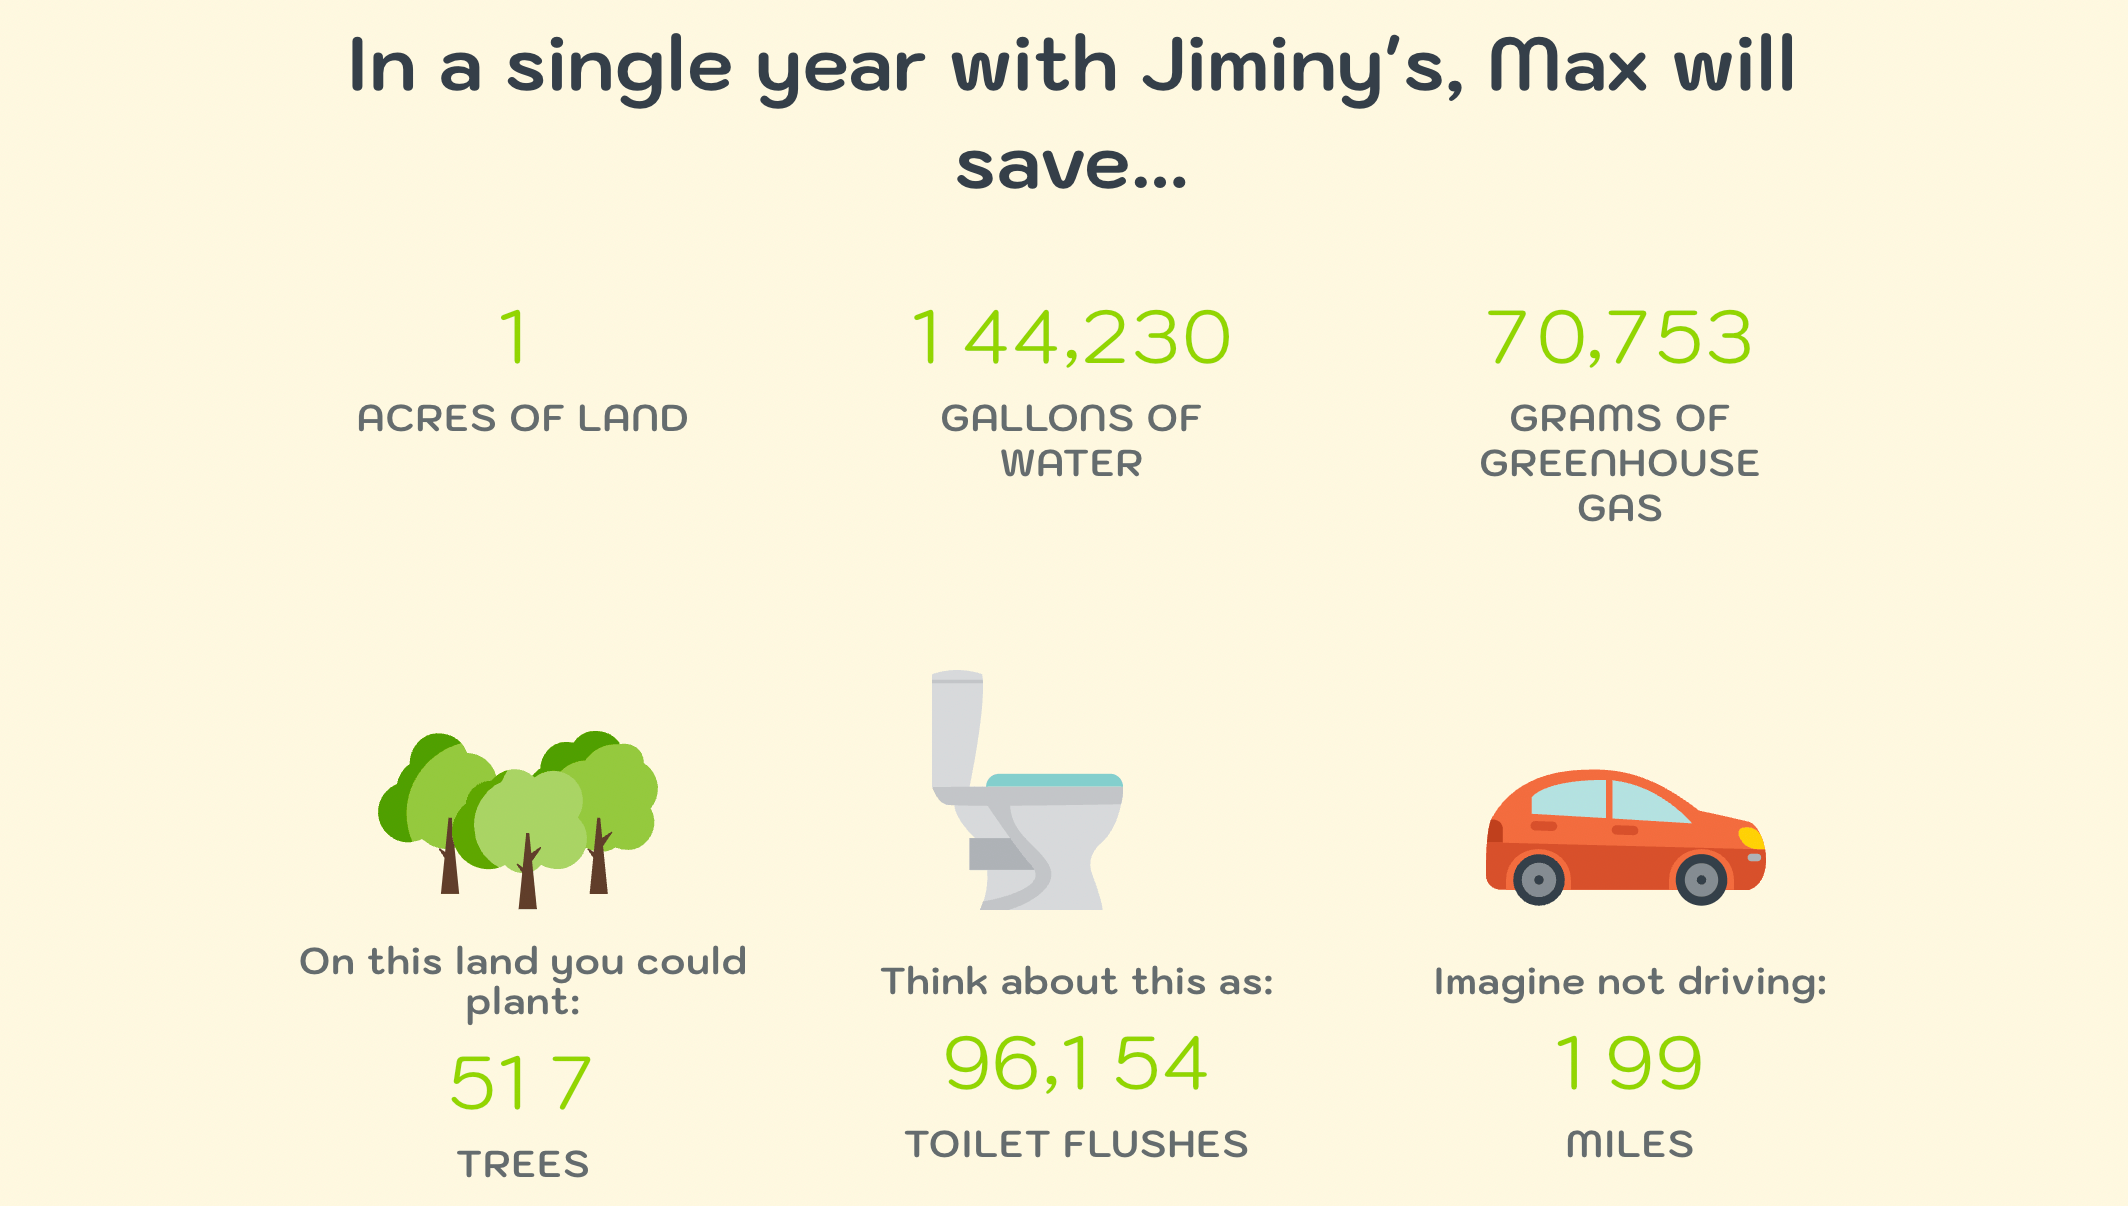 Sustainable brands–Jiminy’s eco calculator results page. The text is: In a single year with Jiminy’s, Max will save…1 acres of land. On this land you could plant 517 trees. 144,230 gallons of water. Think about this as: 96,154 toilet flushes. 70,753 grams of greenhouse gas. Imagine not driving 199 miles. There are accompanying cartoon images of trees, a toilet, and a car next to each relevant fact.